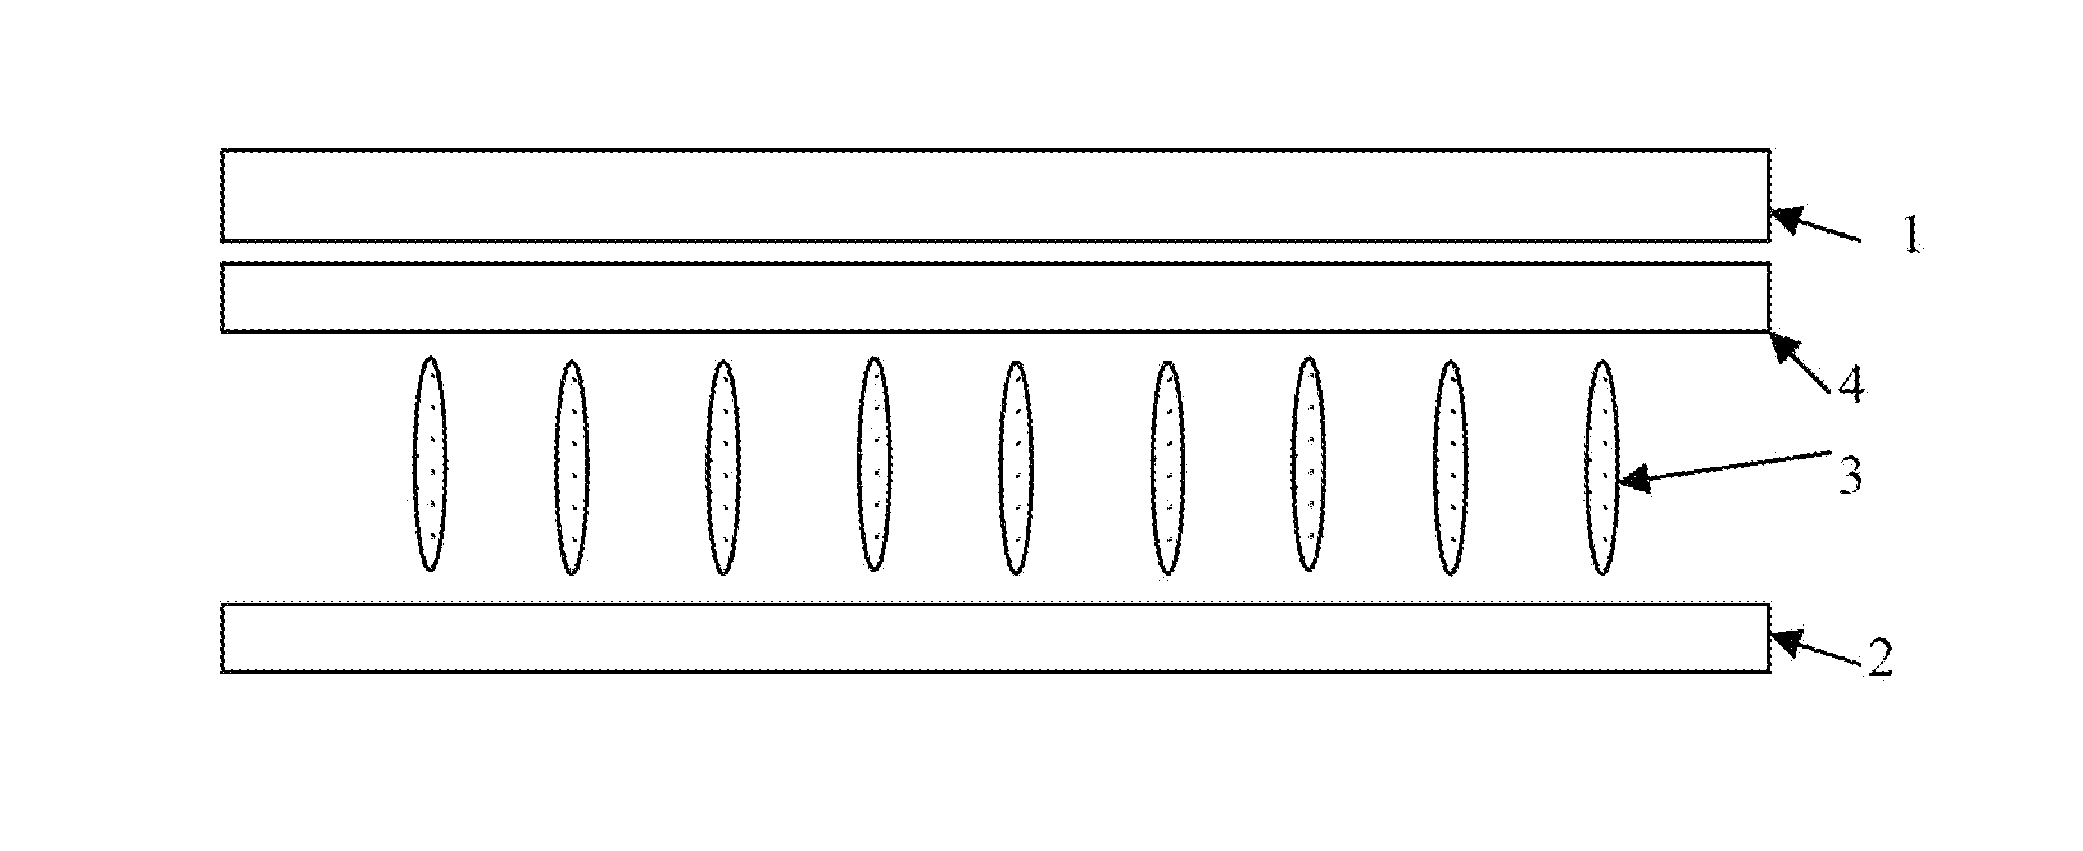 Touch control liquid crystal display device